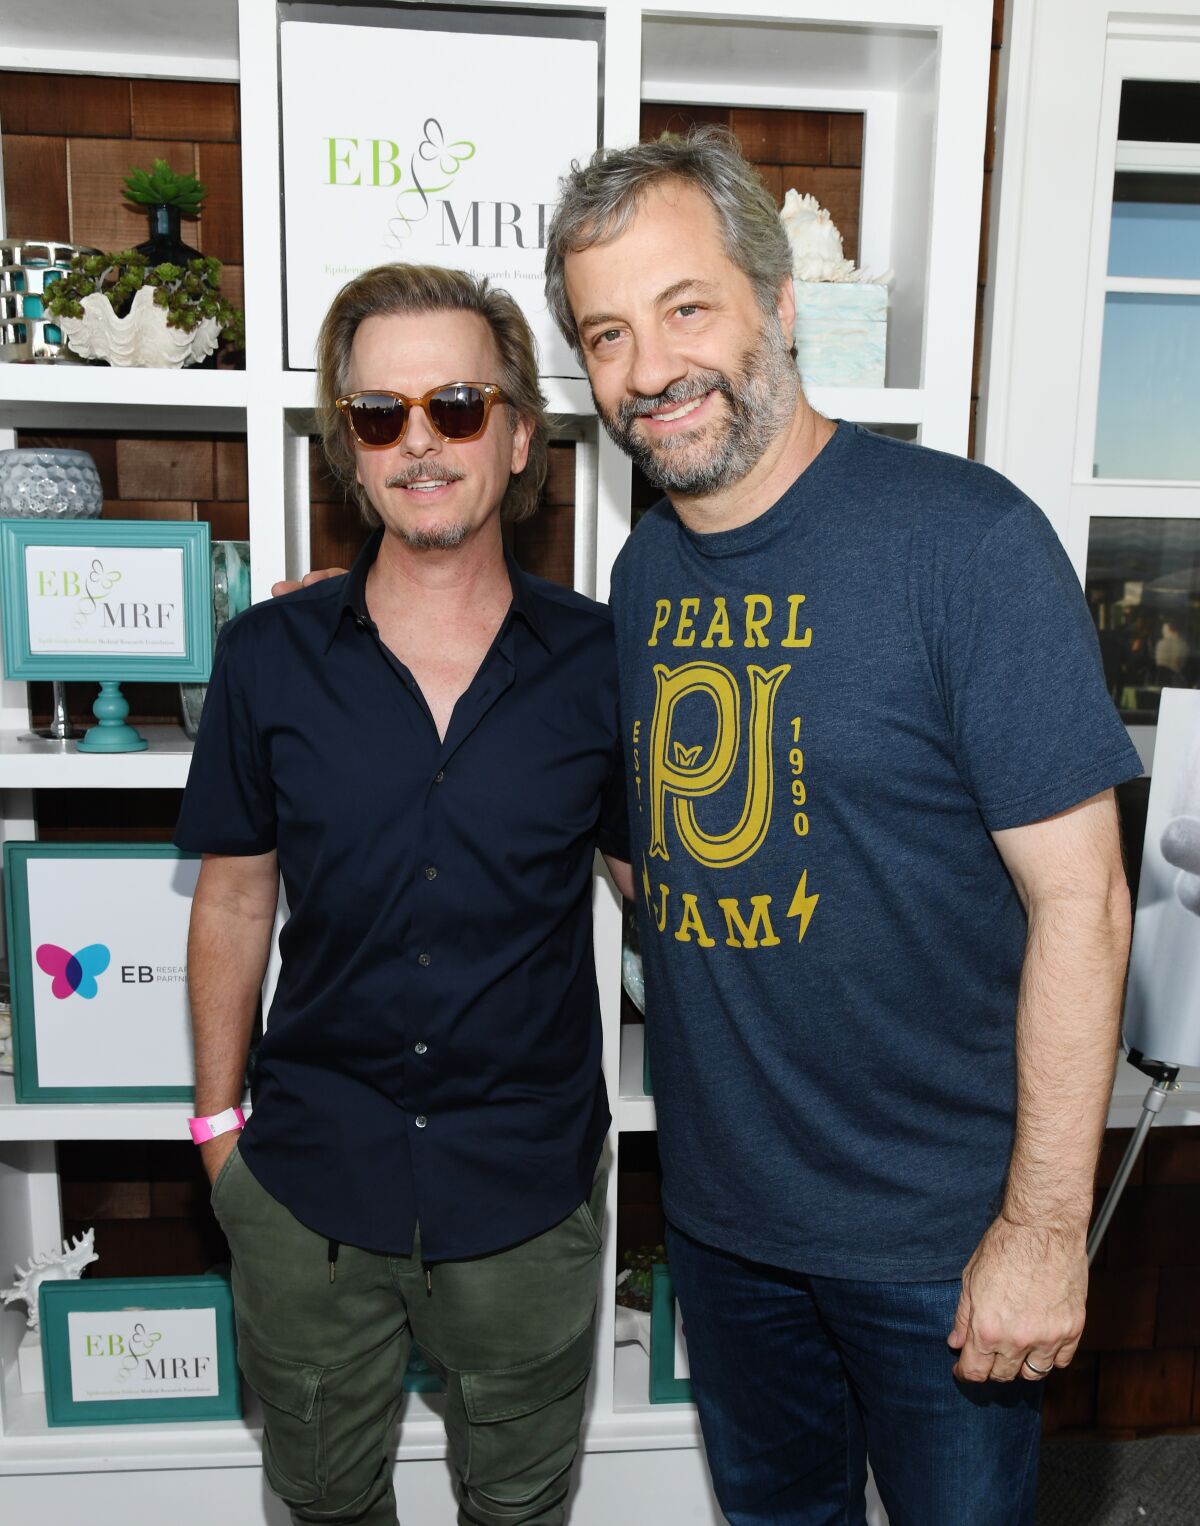 David Spade, left, and Judd Apatow attend Rock4EB! at a private residence in Malibu on Oct. 6, 2019.